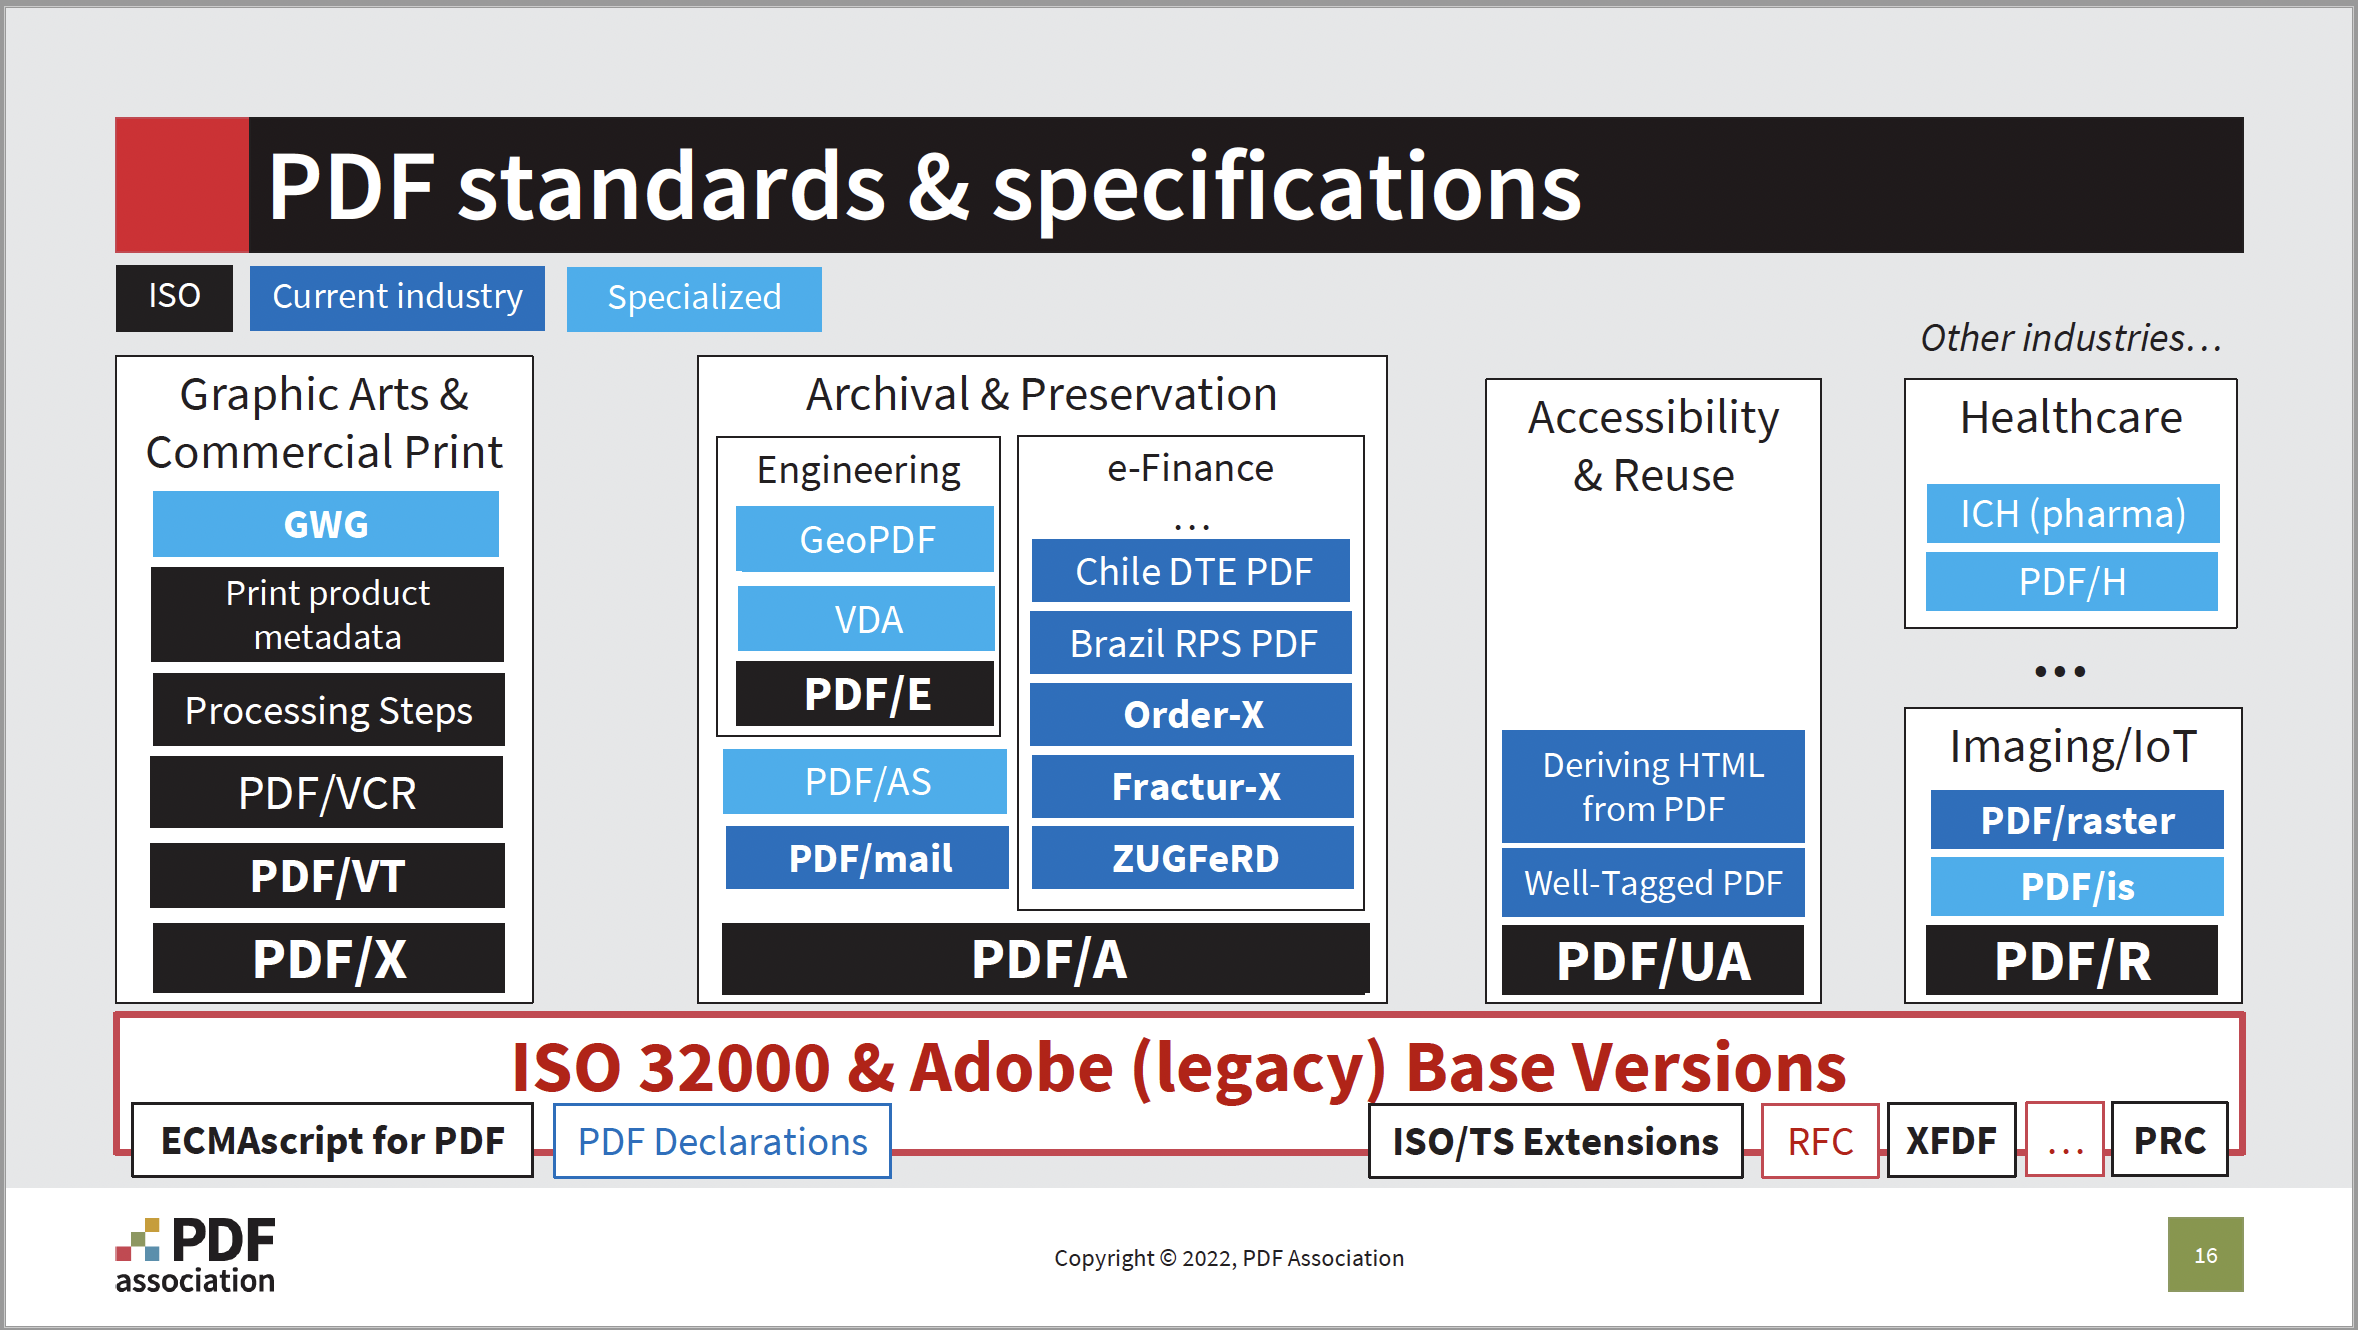 Source: PDF Association, Overview: PDF Standards & Specifications (2022) - Picture